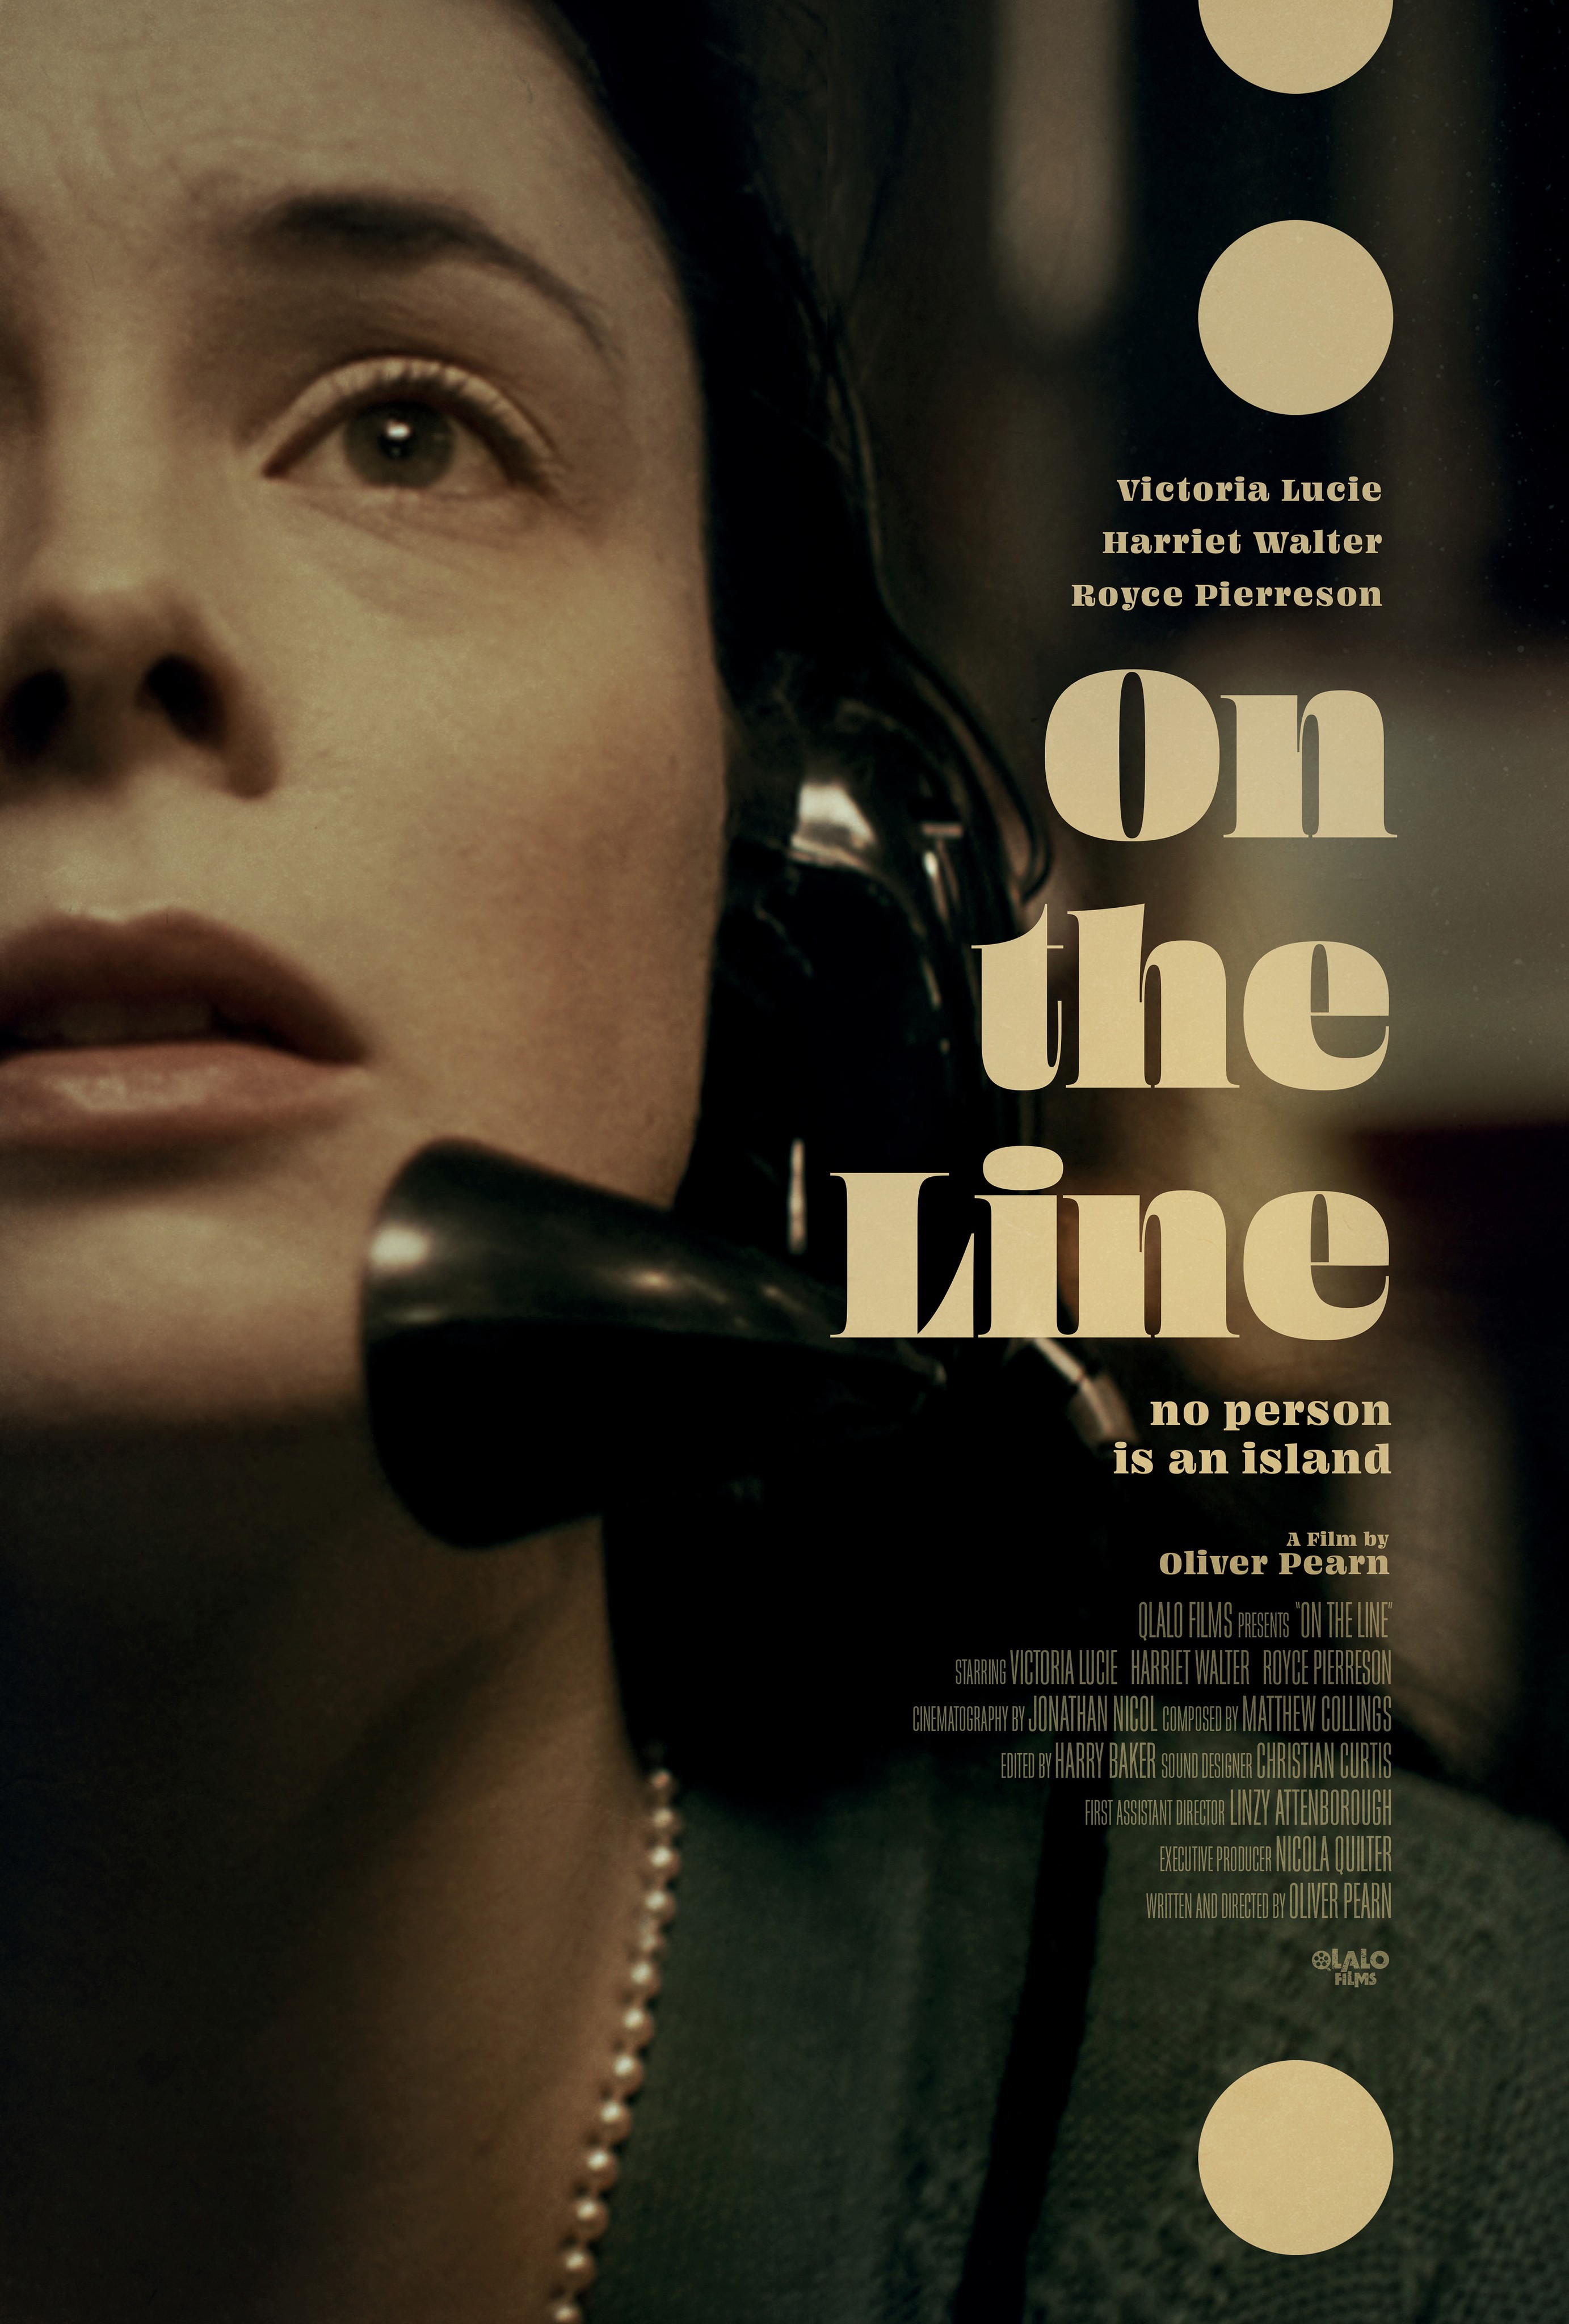 The Other End of the Line - Rotten Tomatoes